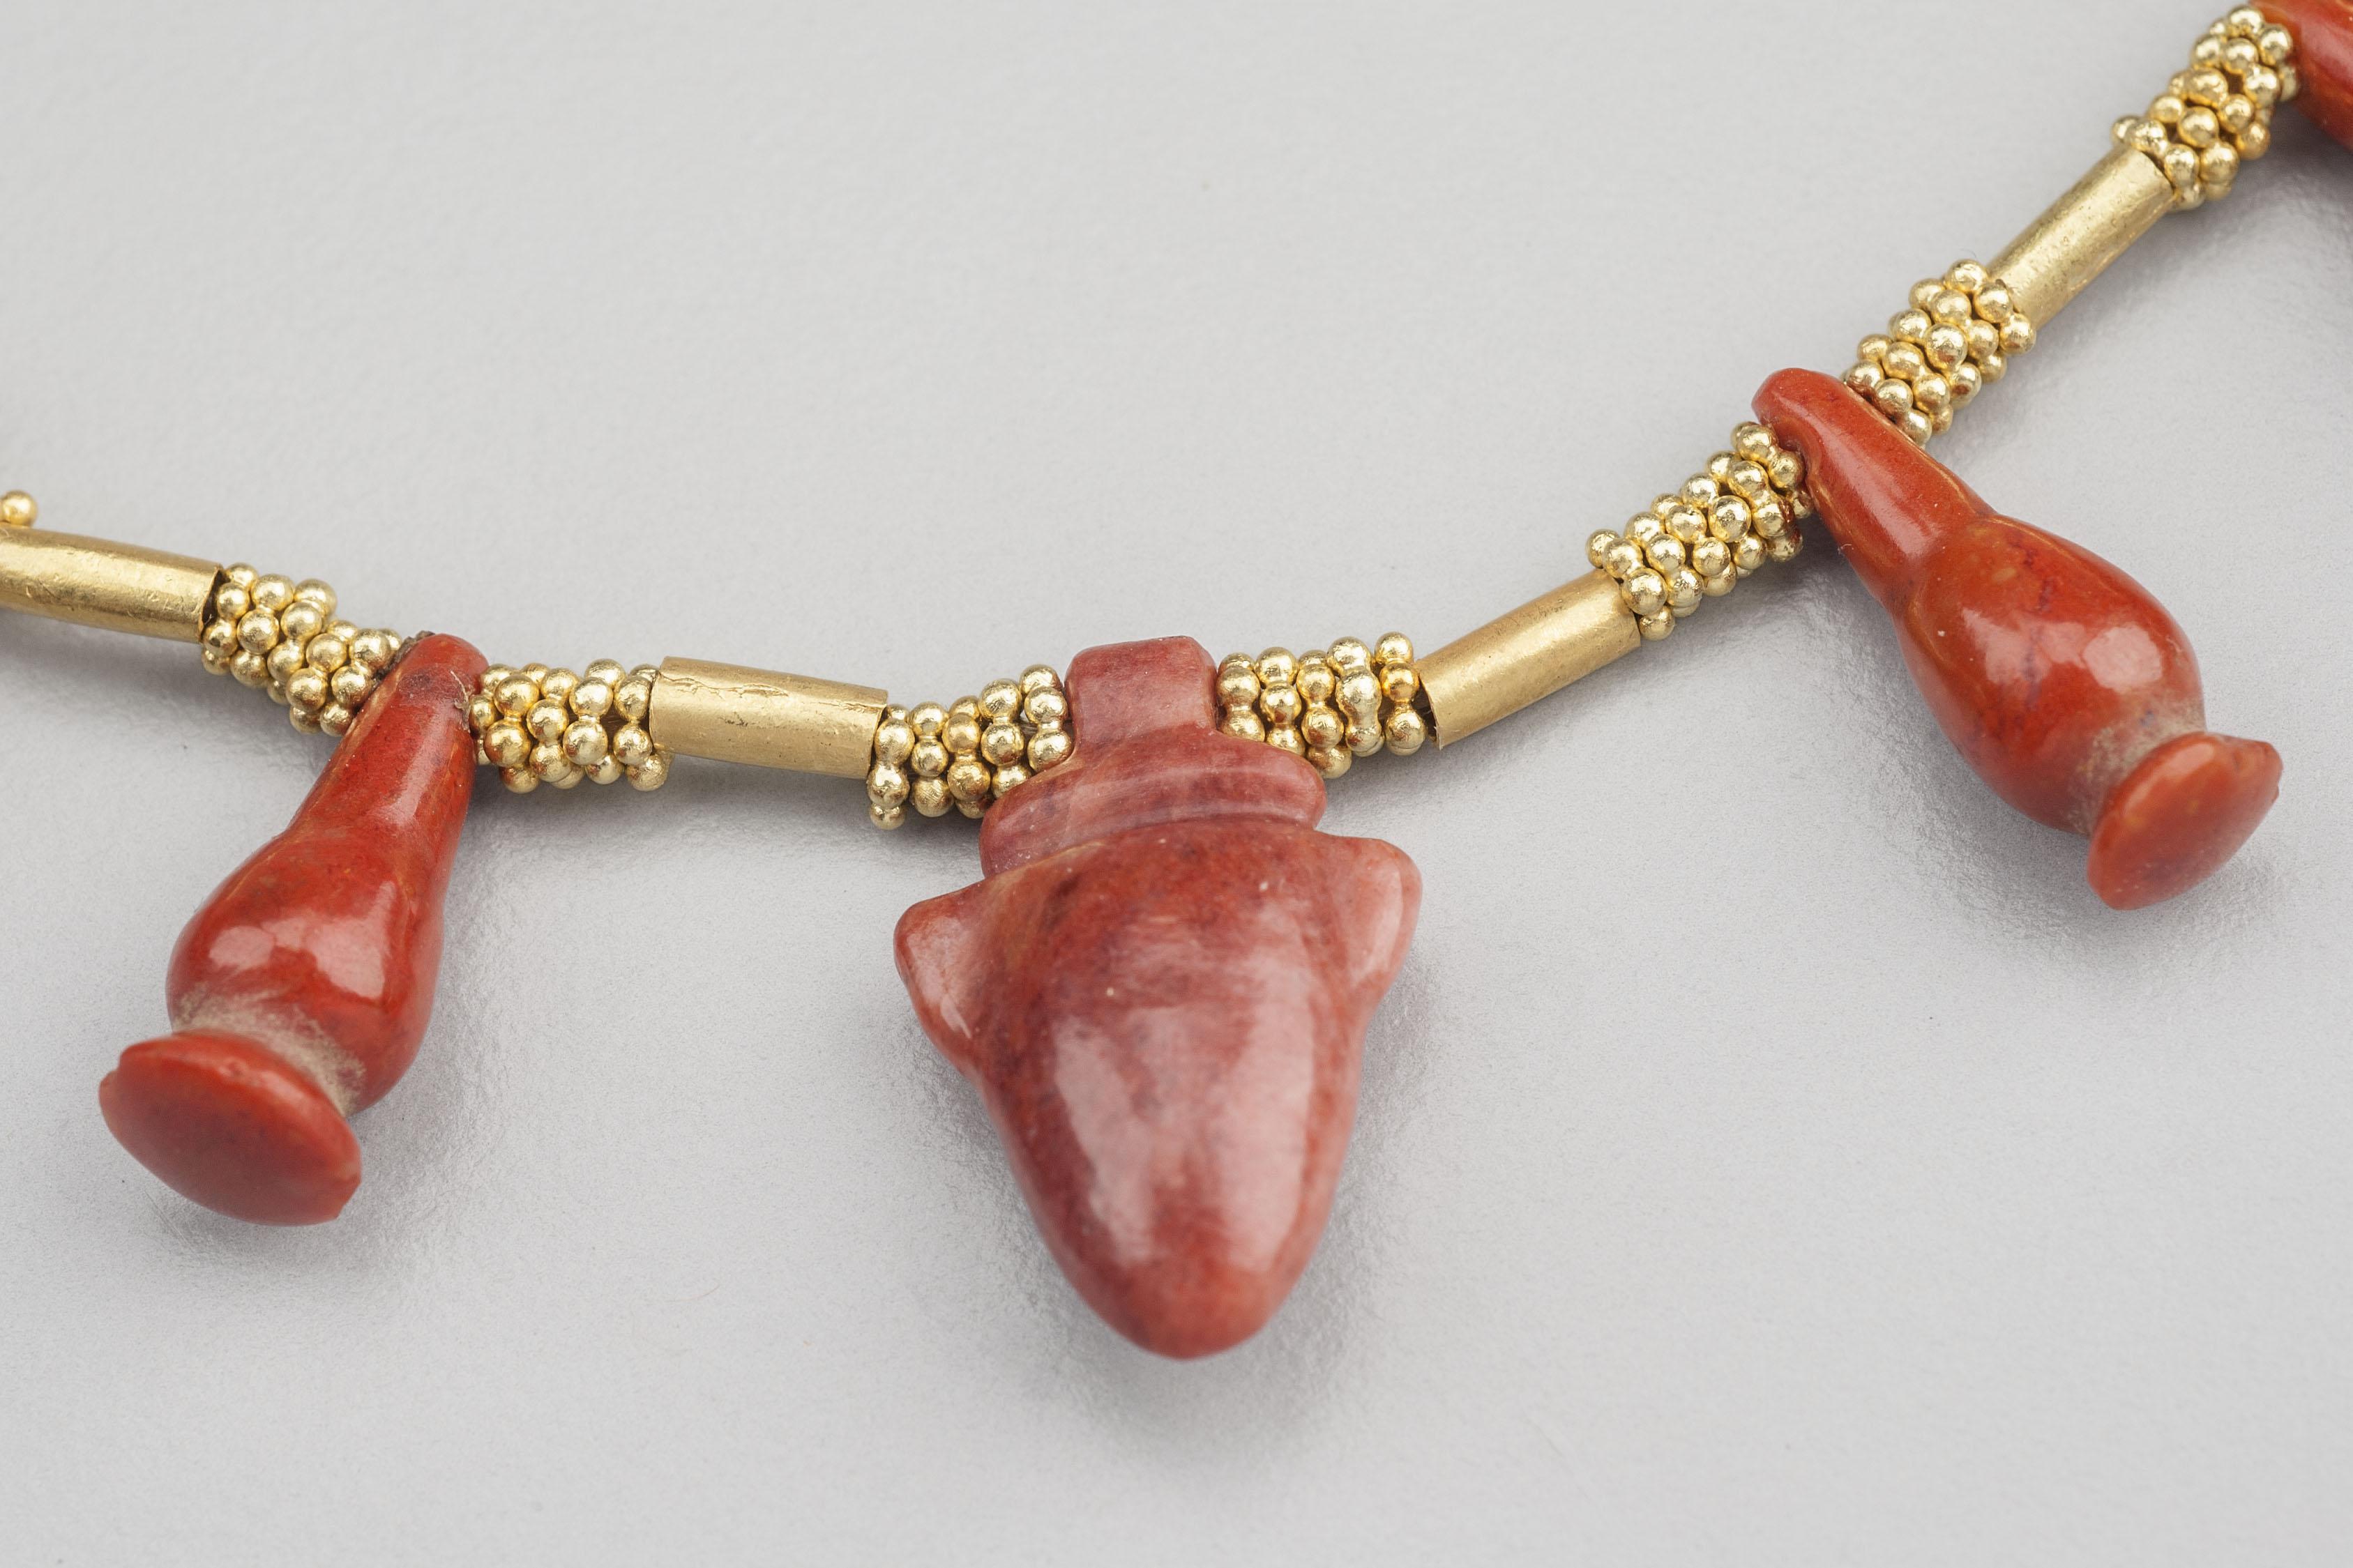 Twelve jasper amulets, three carnelian amulets and two carnelian cylinder beads spaced between 20k gold granulated ring beads and plain gold tube beads. There are thirty-six groups of five rings each between the amulets and the gold tubes. In